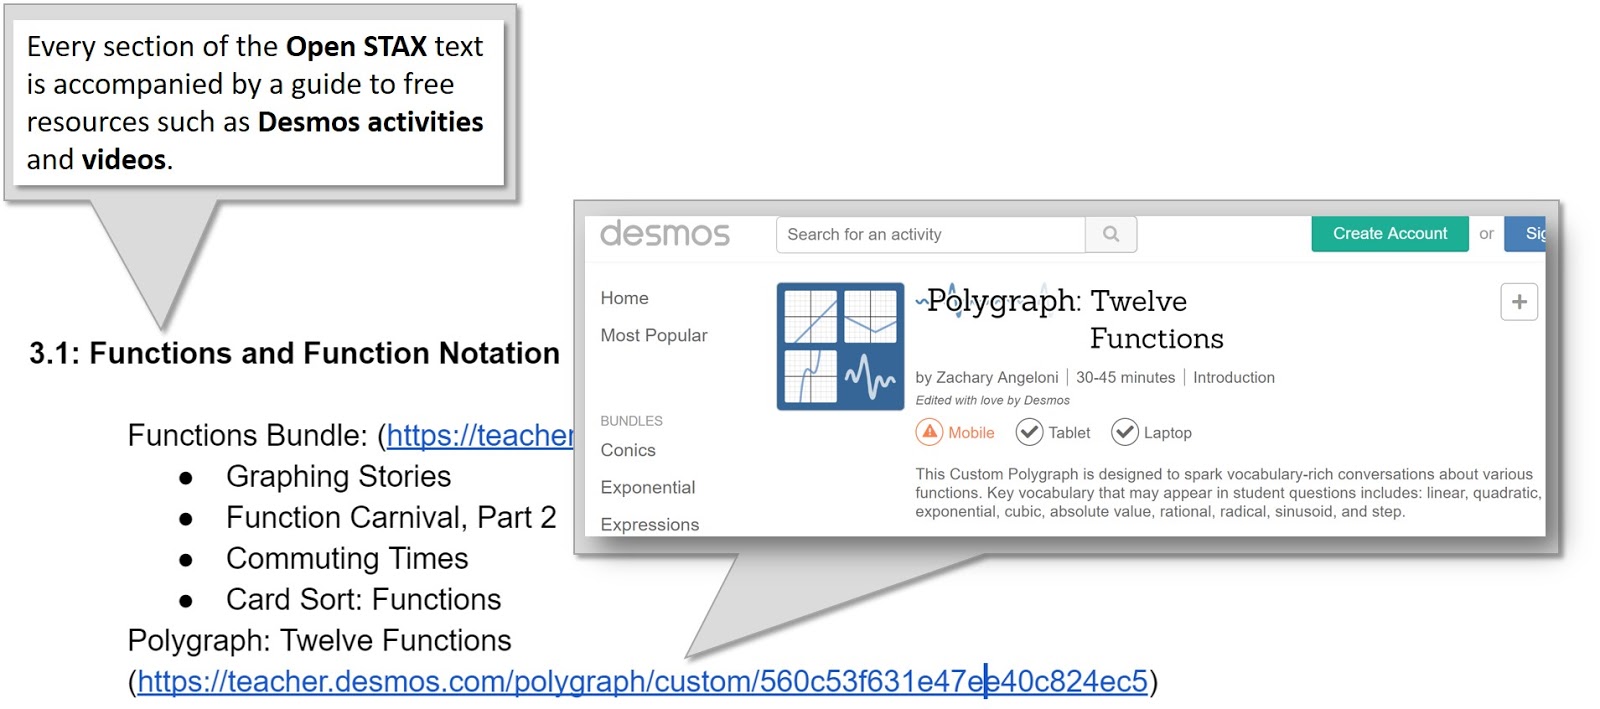 Screenshot with expanded link to Desmos Polygraph Twelve Functions activity